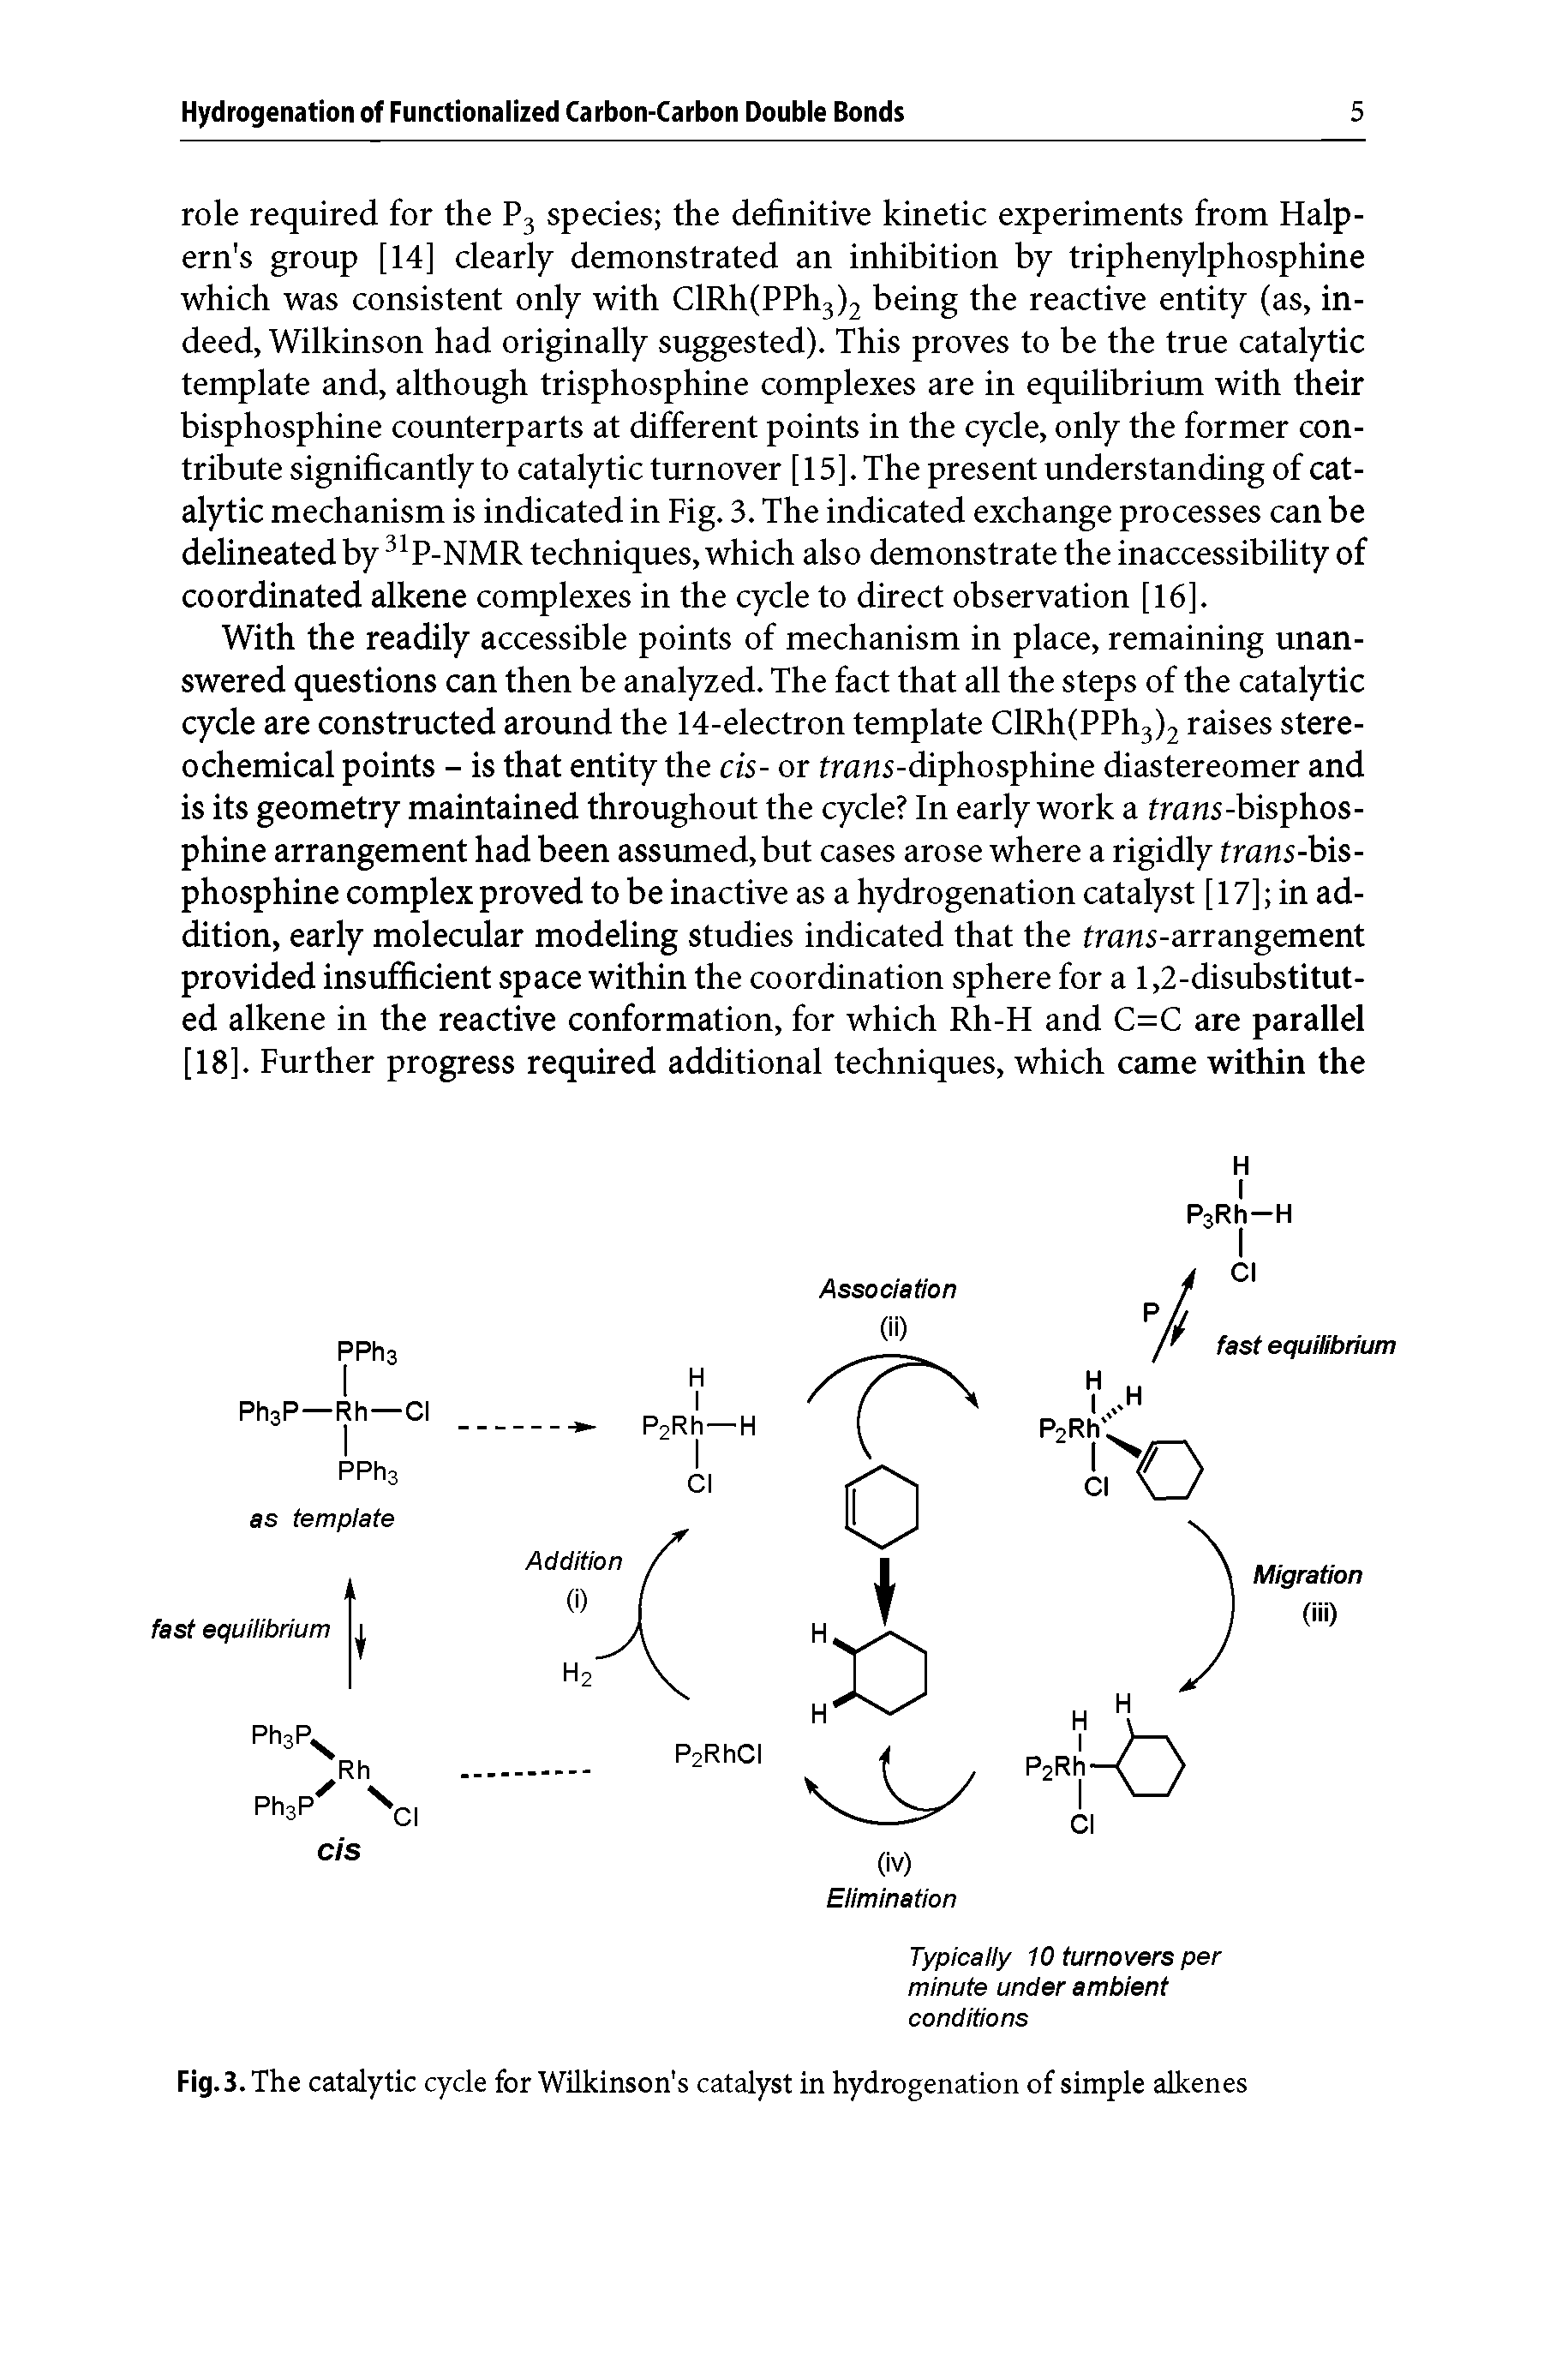 Fig.3. The catalytic cycle for Wilkinson s catalyst in hydrogenation of simple alkenes...